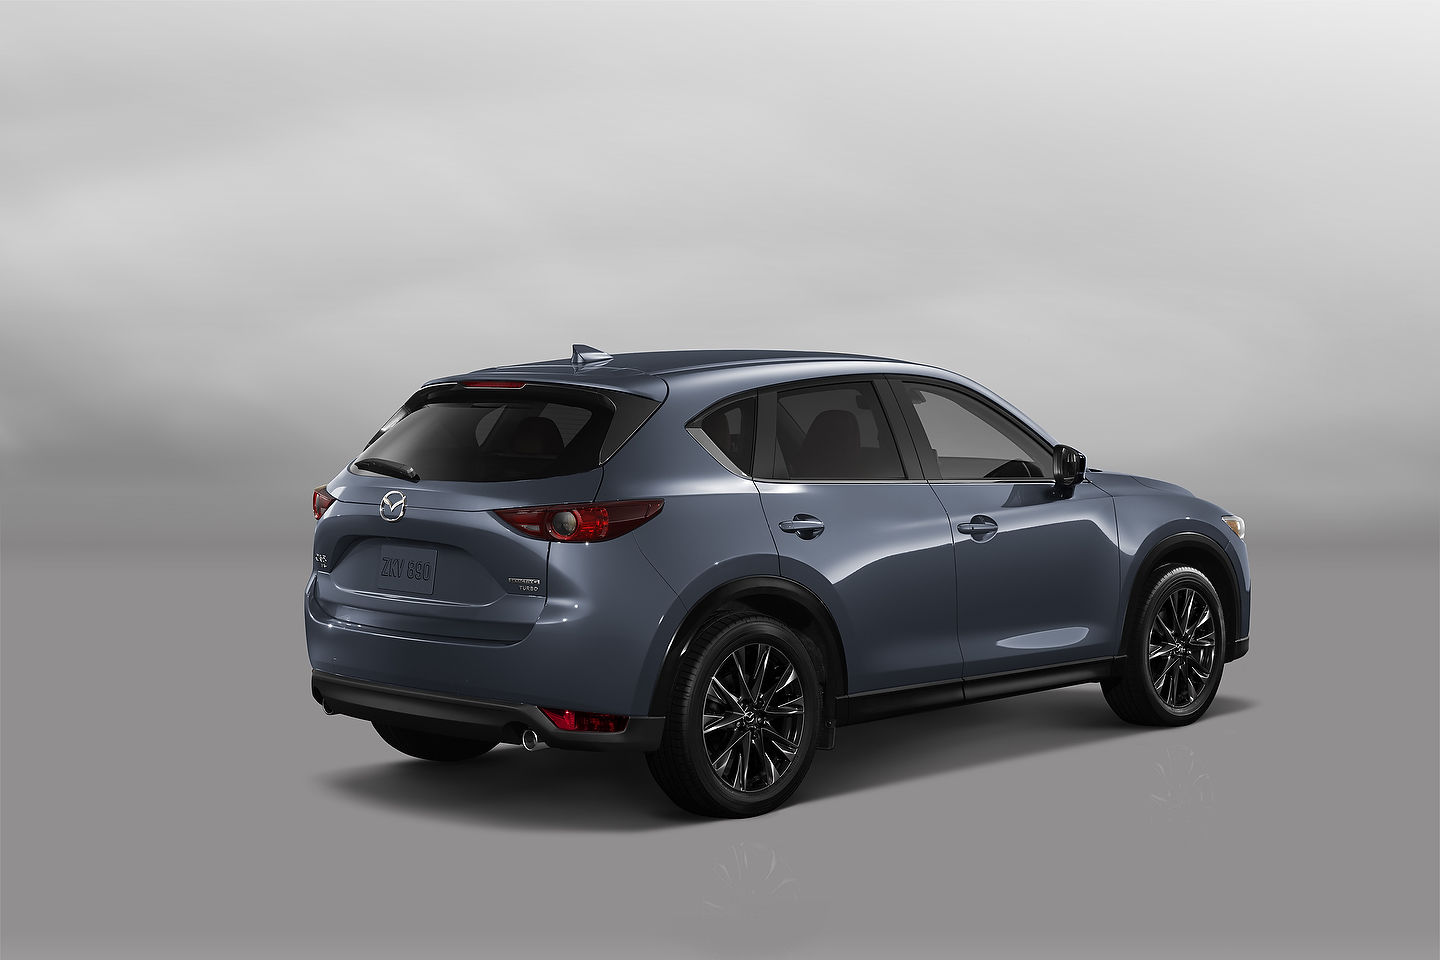 2021.5 Mazda CX-5 Pricing and Specs